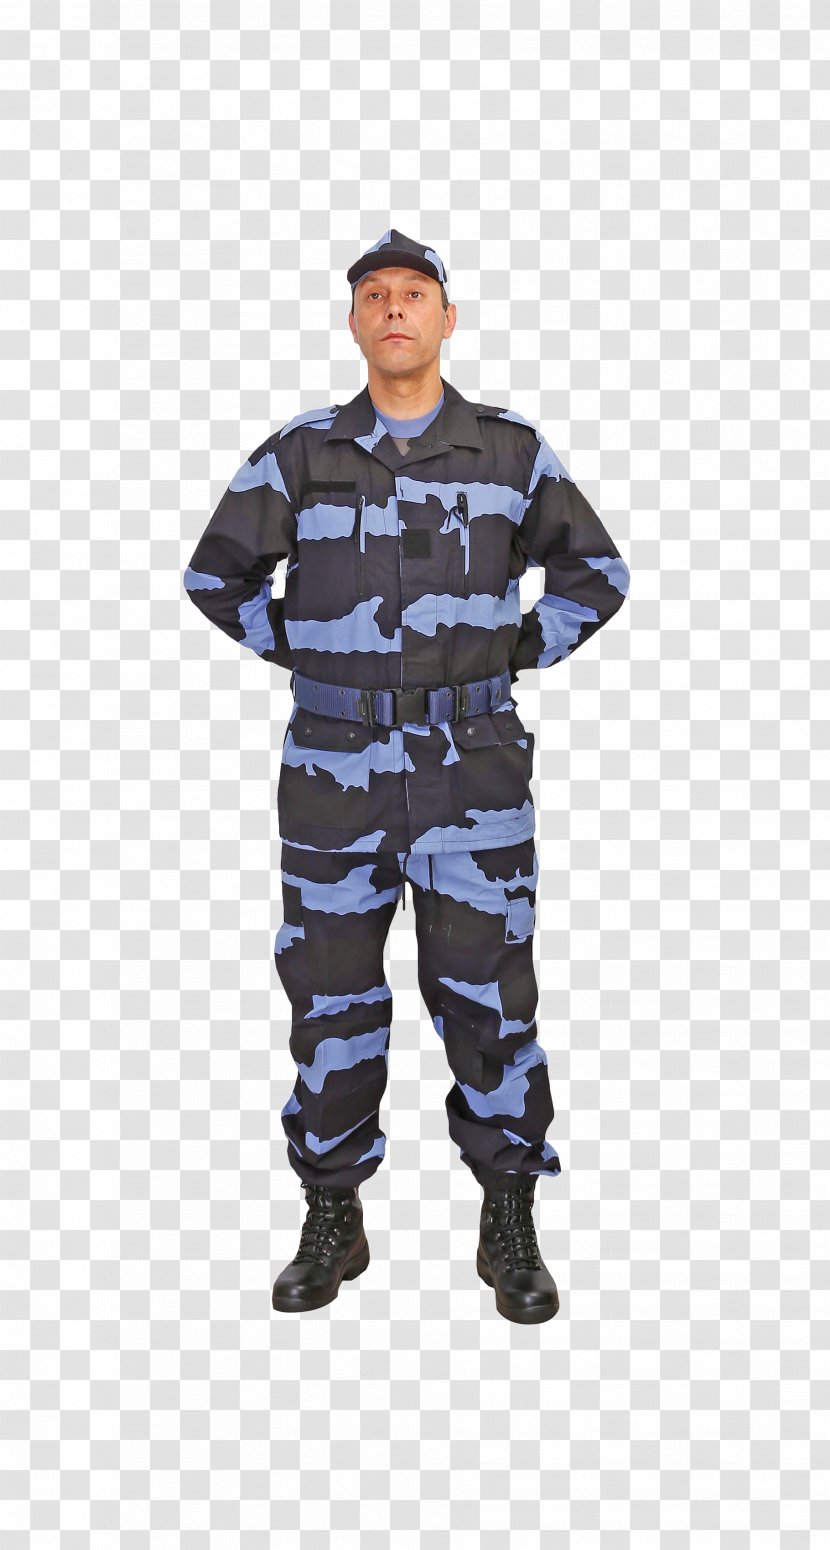 Military Camouflage Uniform Soldier Army - Organization Transparent PNG